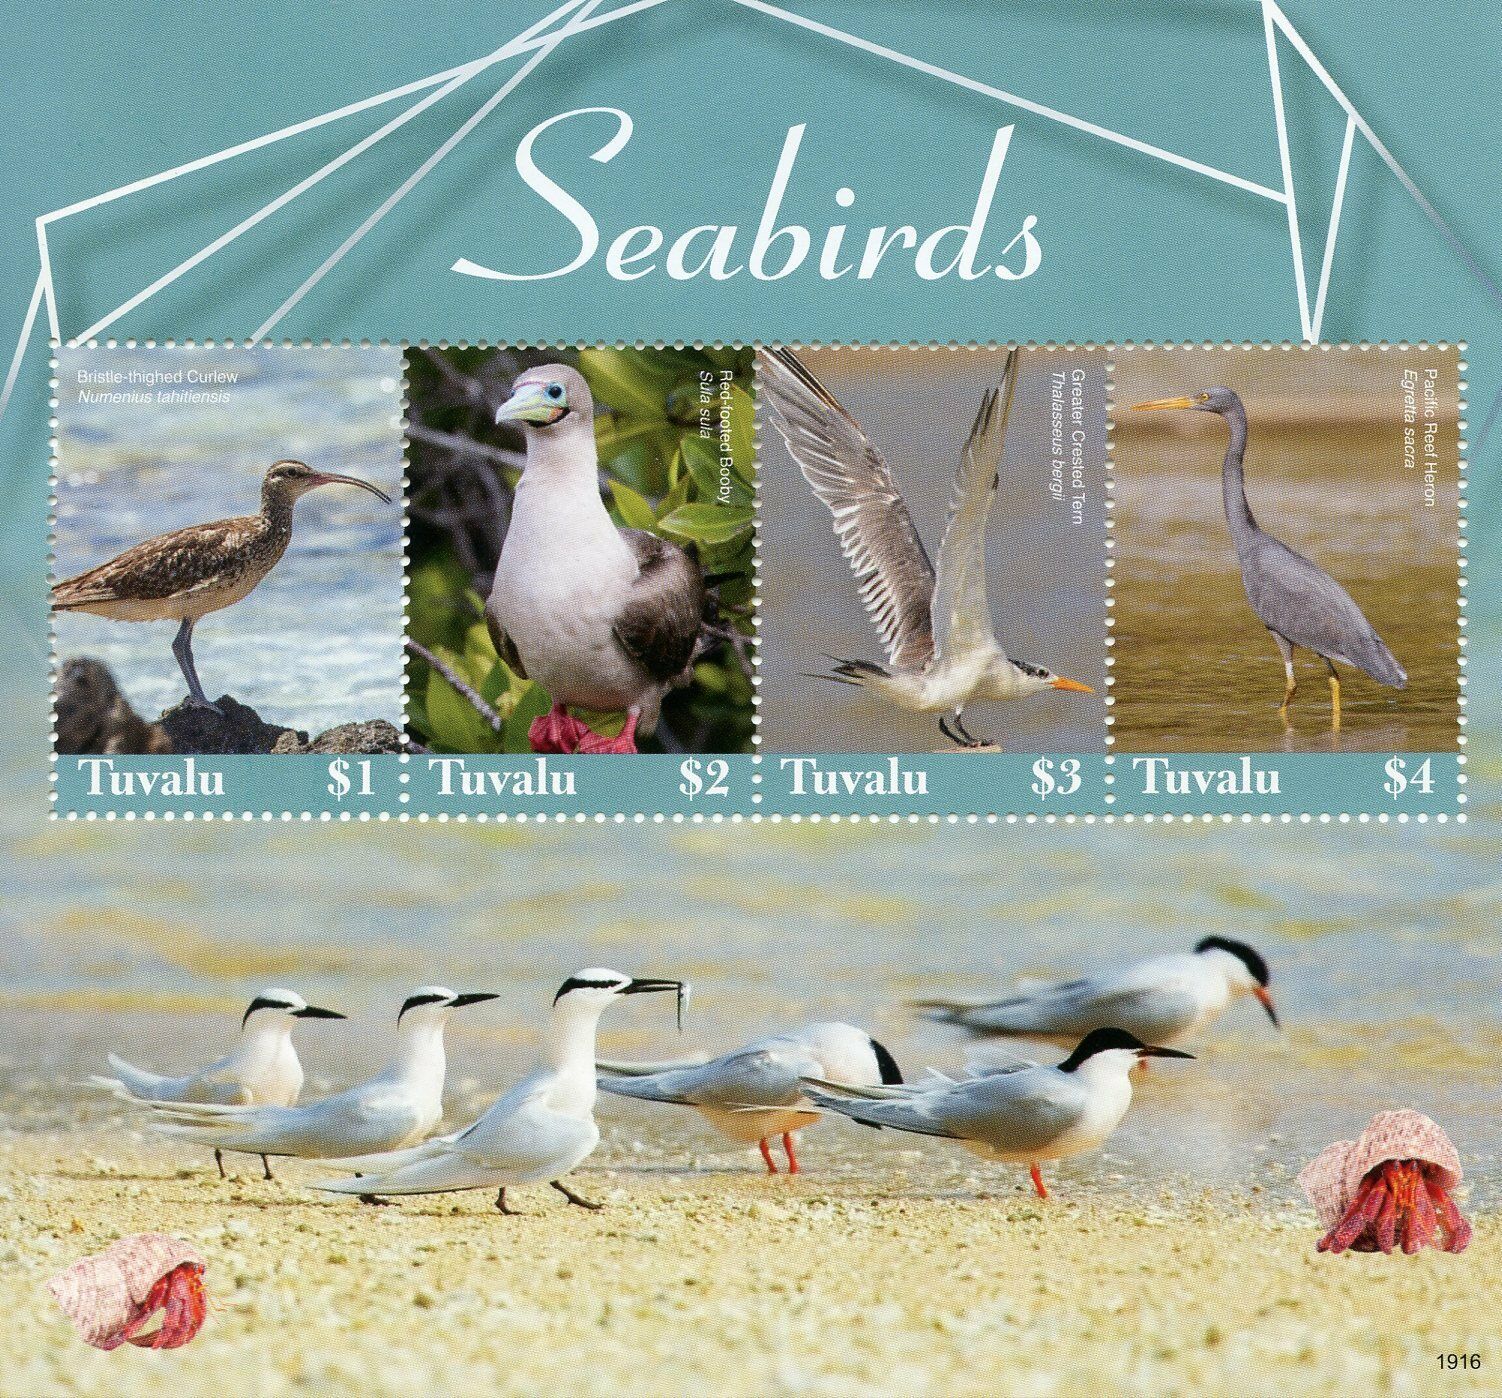 Tuvalu Birds on Stamps 2019 MNH Seabirds Herons Terns Booby Curlew 4v M/S